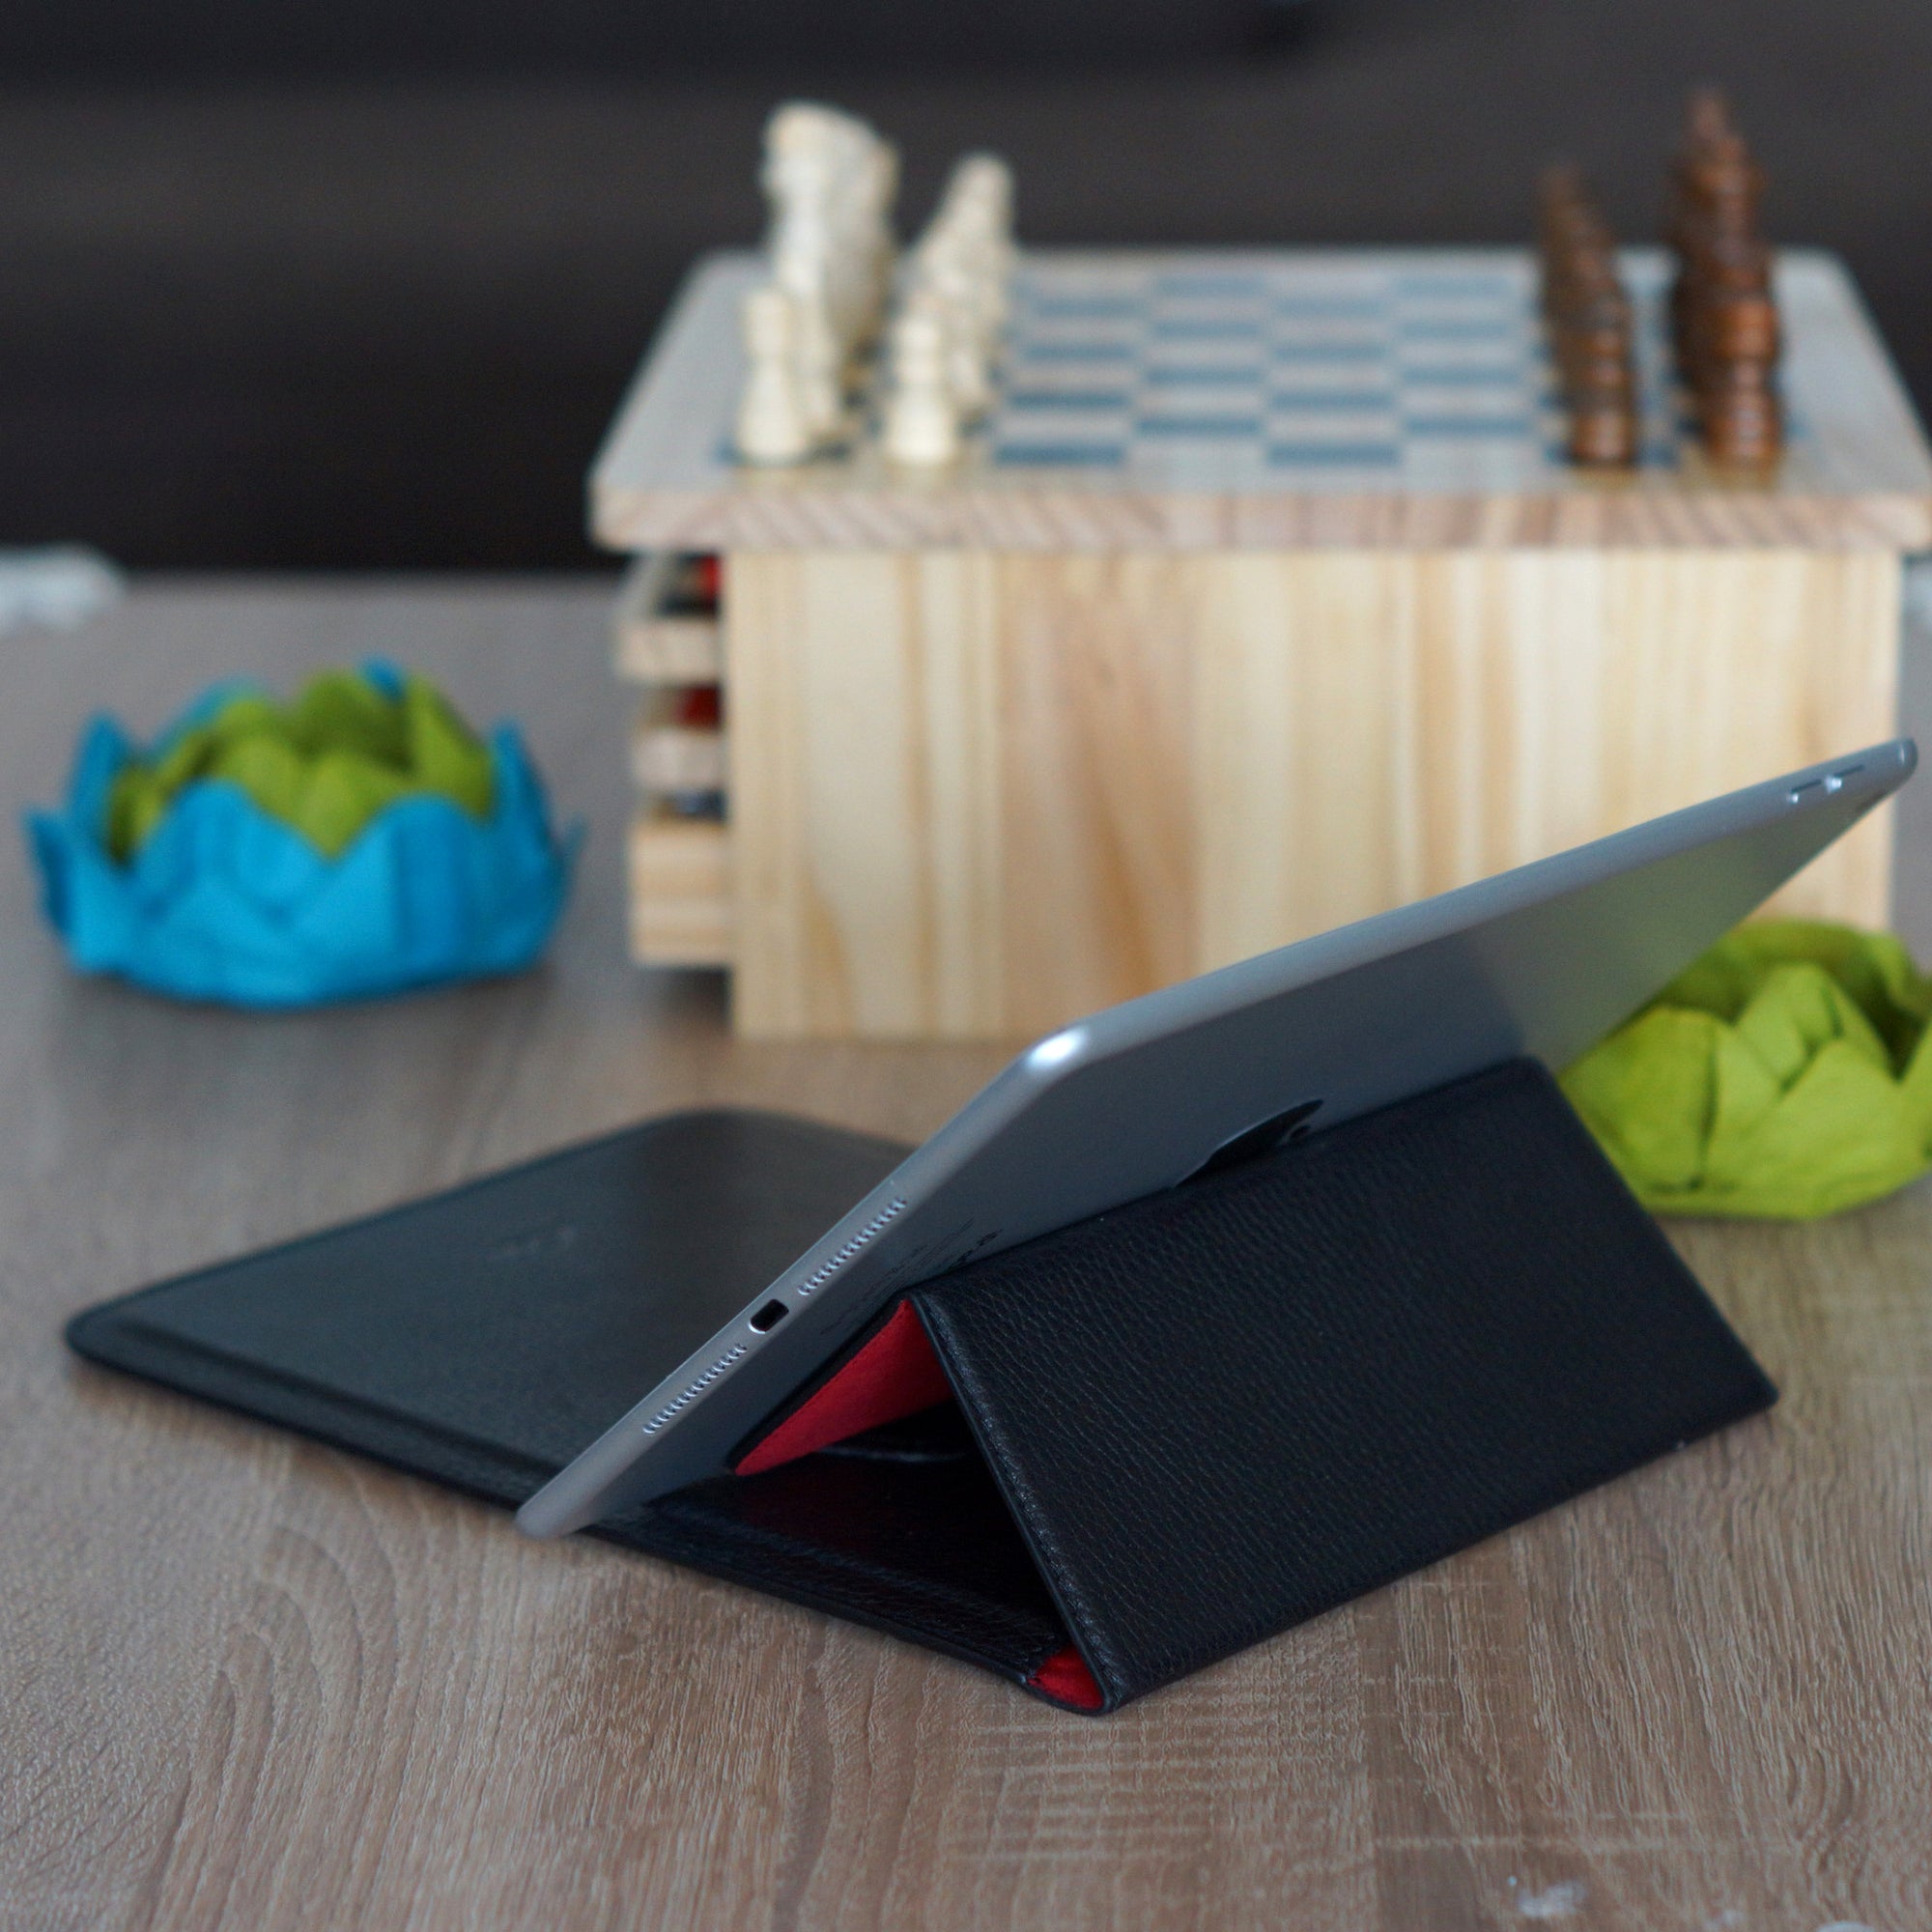 MORE THAN A SIMPLE TABLET CASE...